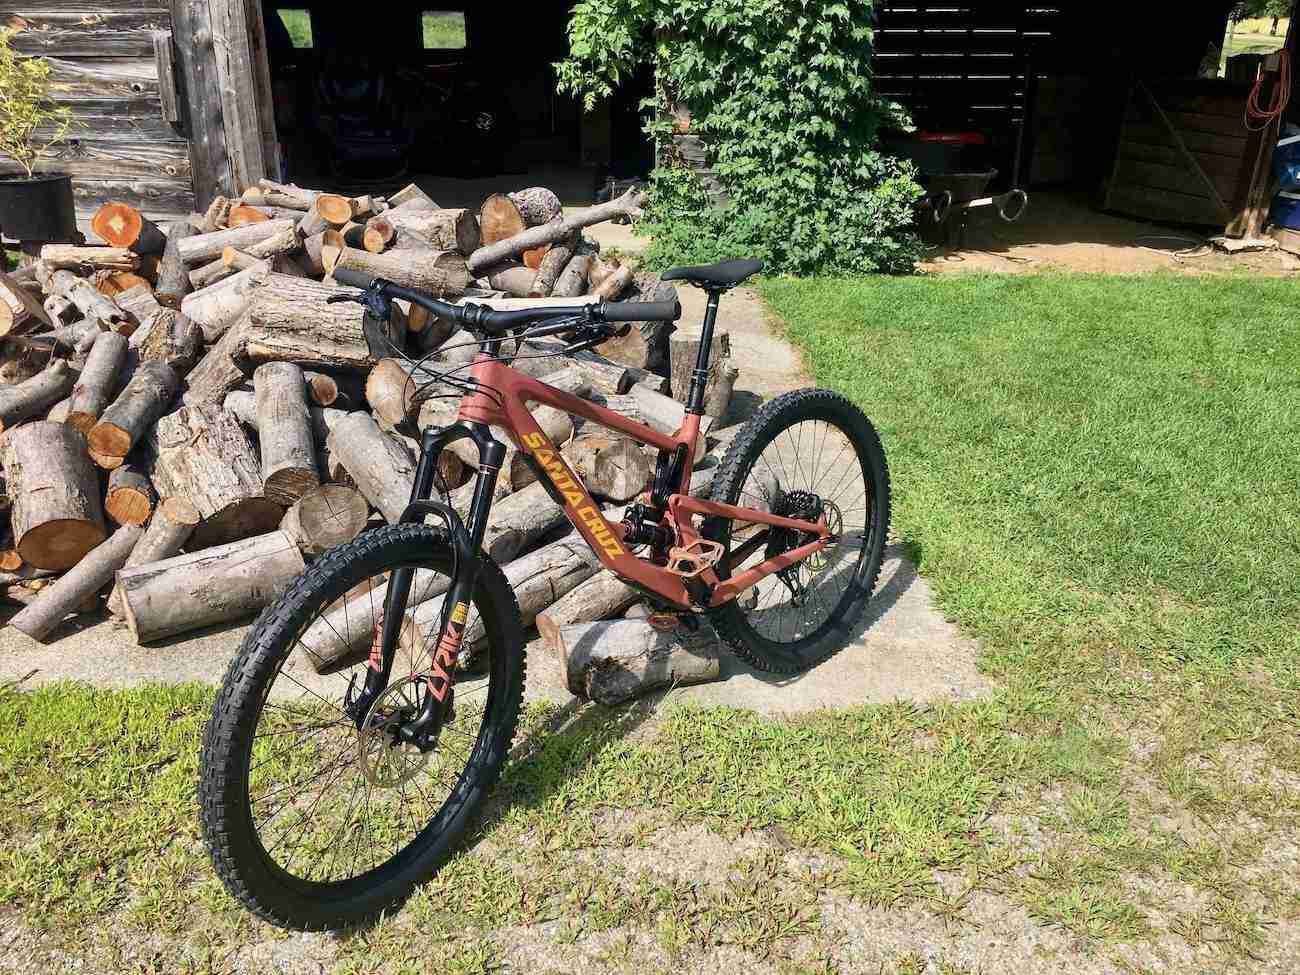 Learn the best tips on how to buy a used mountain bike including what questions to ask, red flags to look for, where to shop, and more.